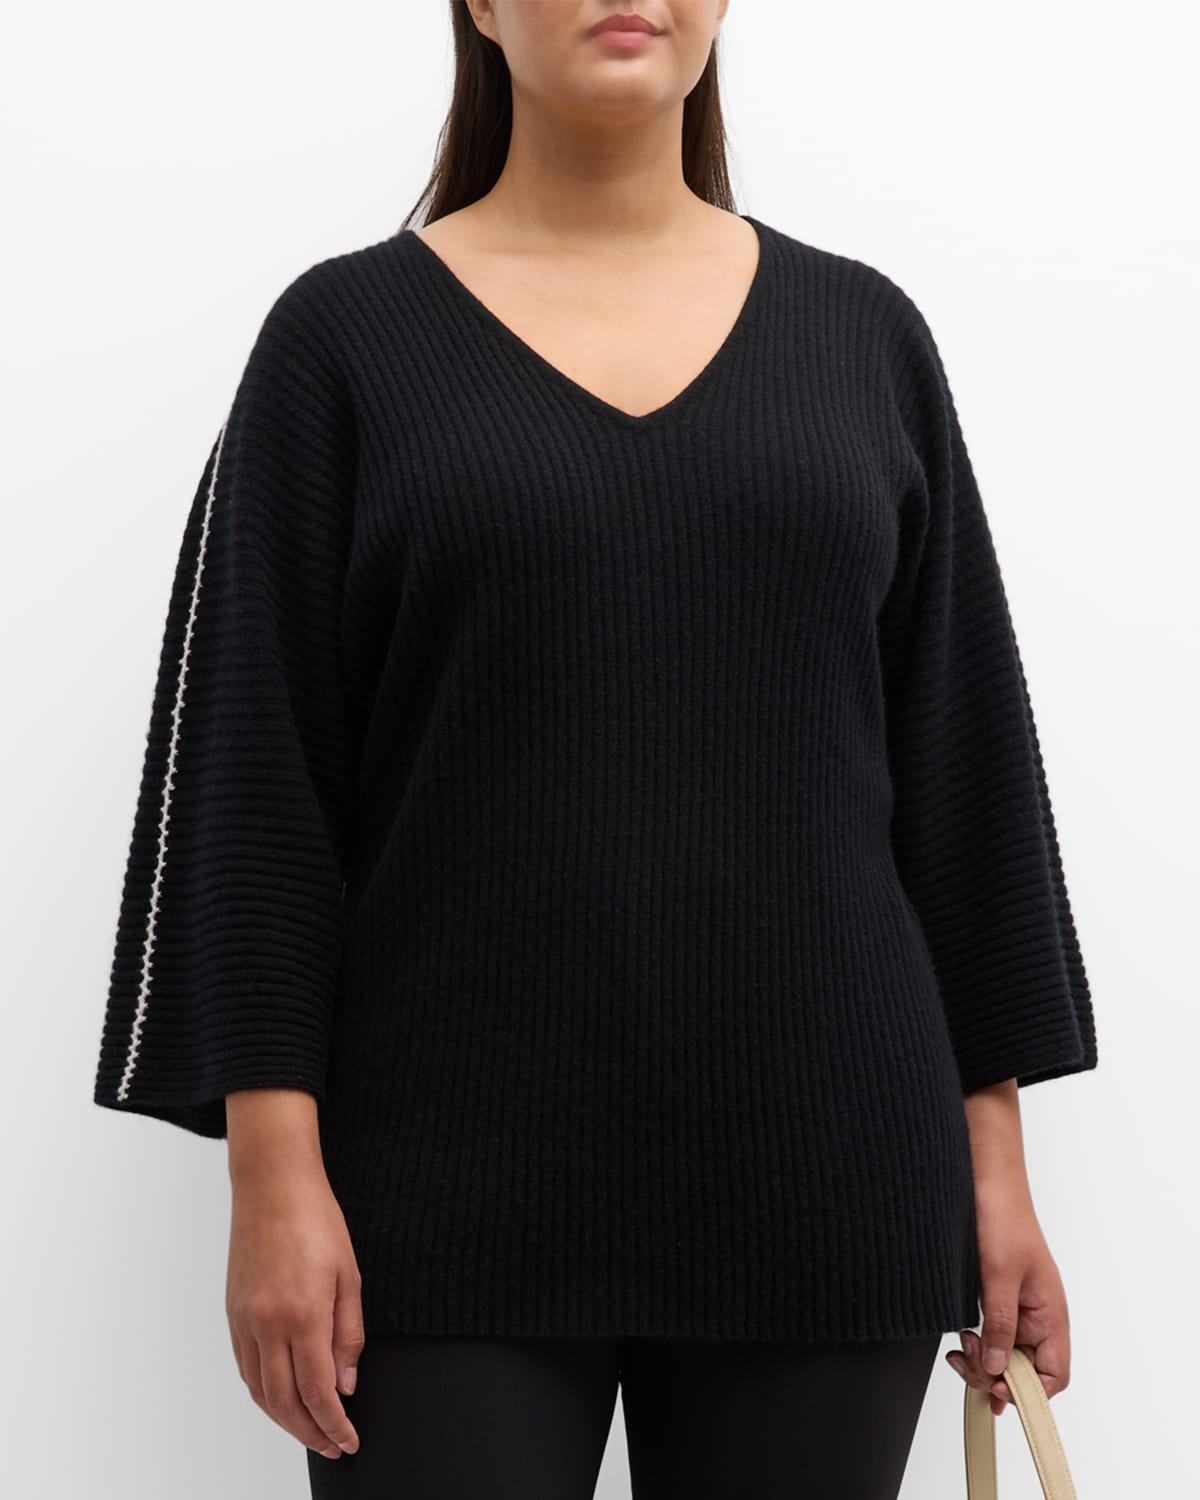 Neiman Marcus Plus Size Cashmere Ribbed Sweater With Whipstitch Detail In Black/white